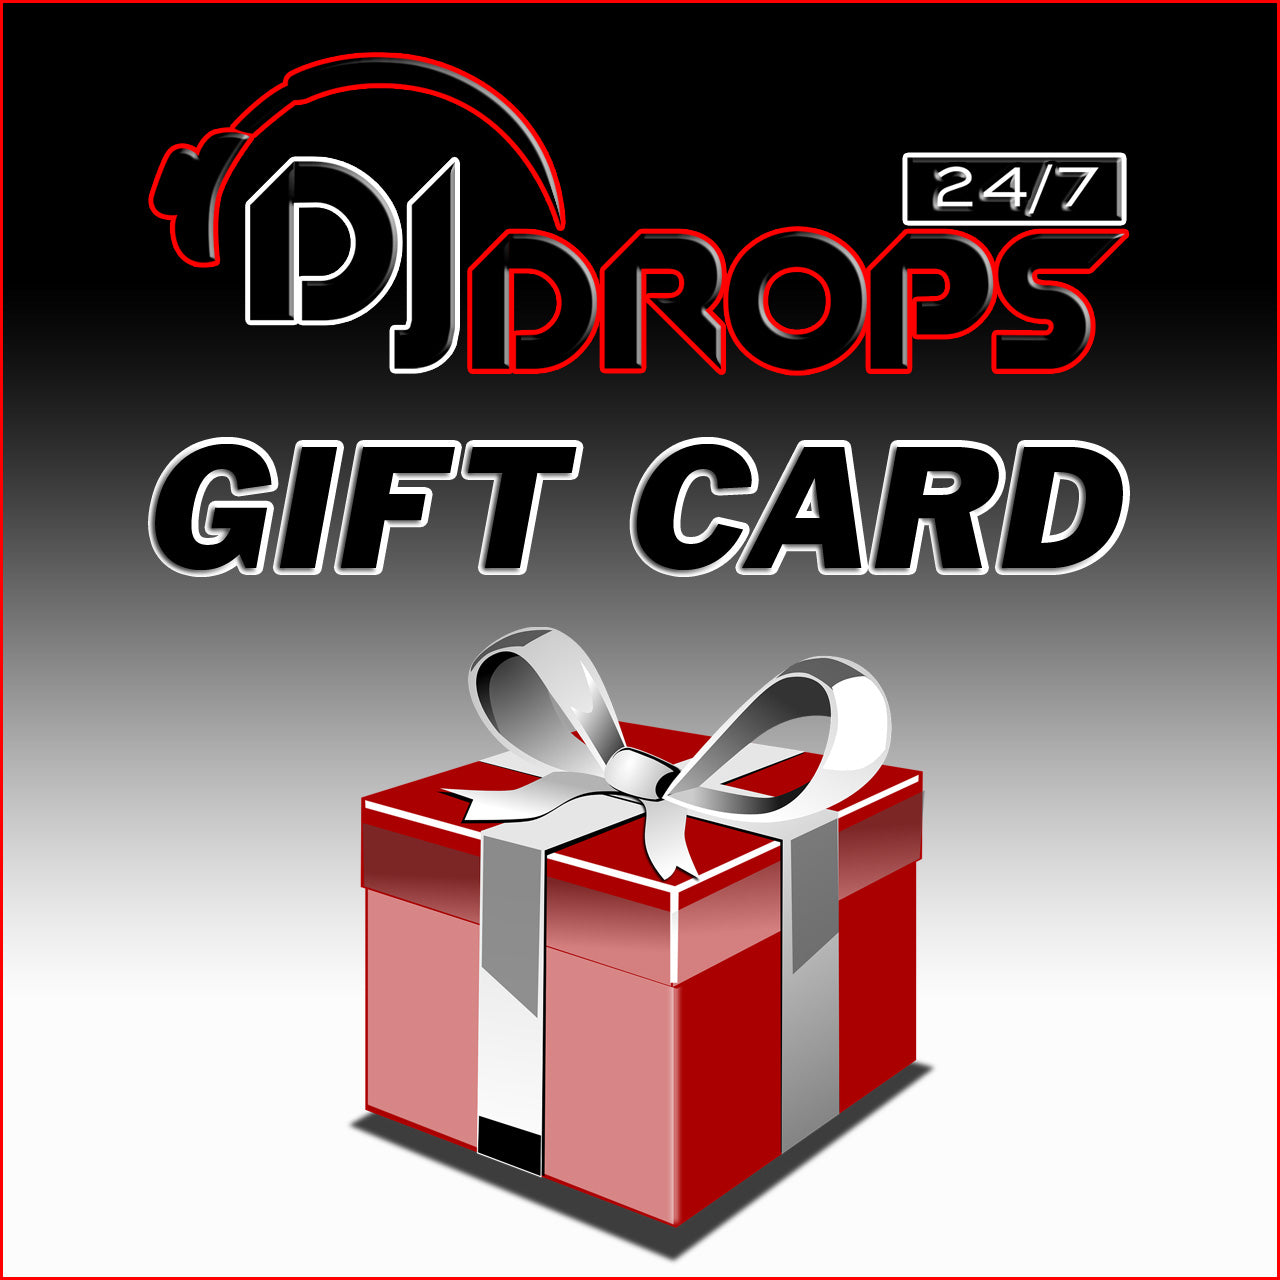 DJ Drops 24/7 Gift Cards